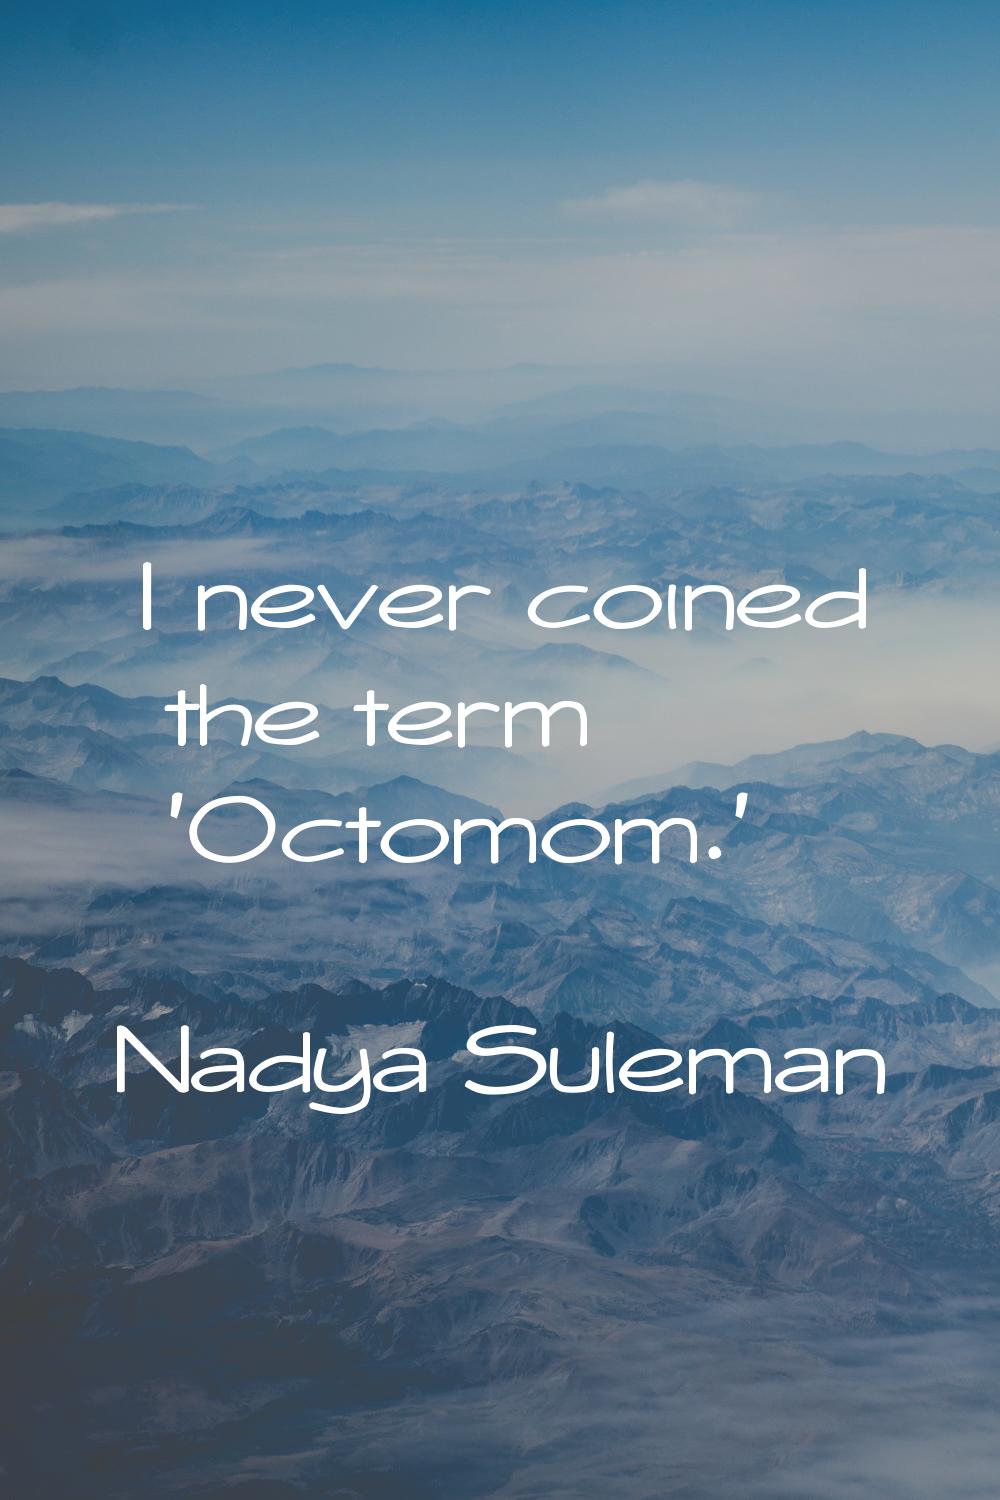 I never coined the term 'Octomom.'